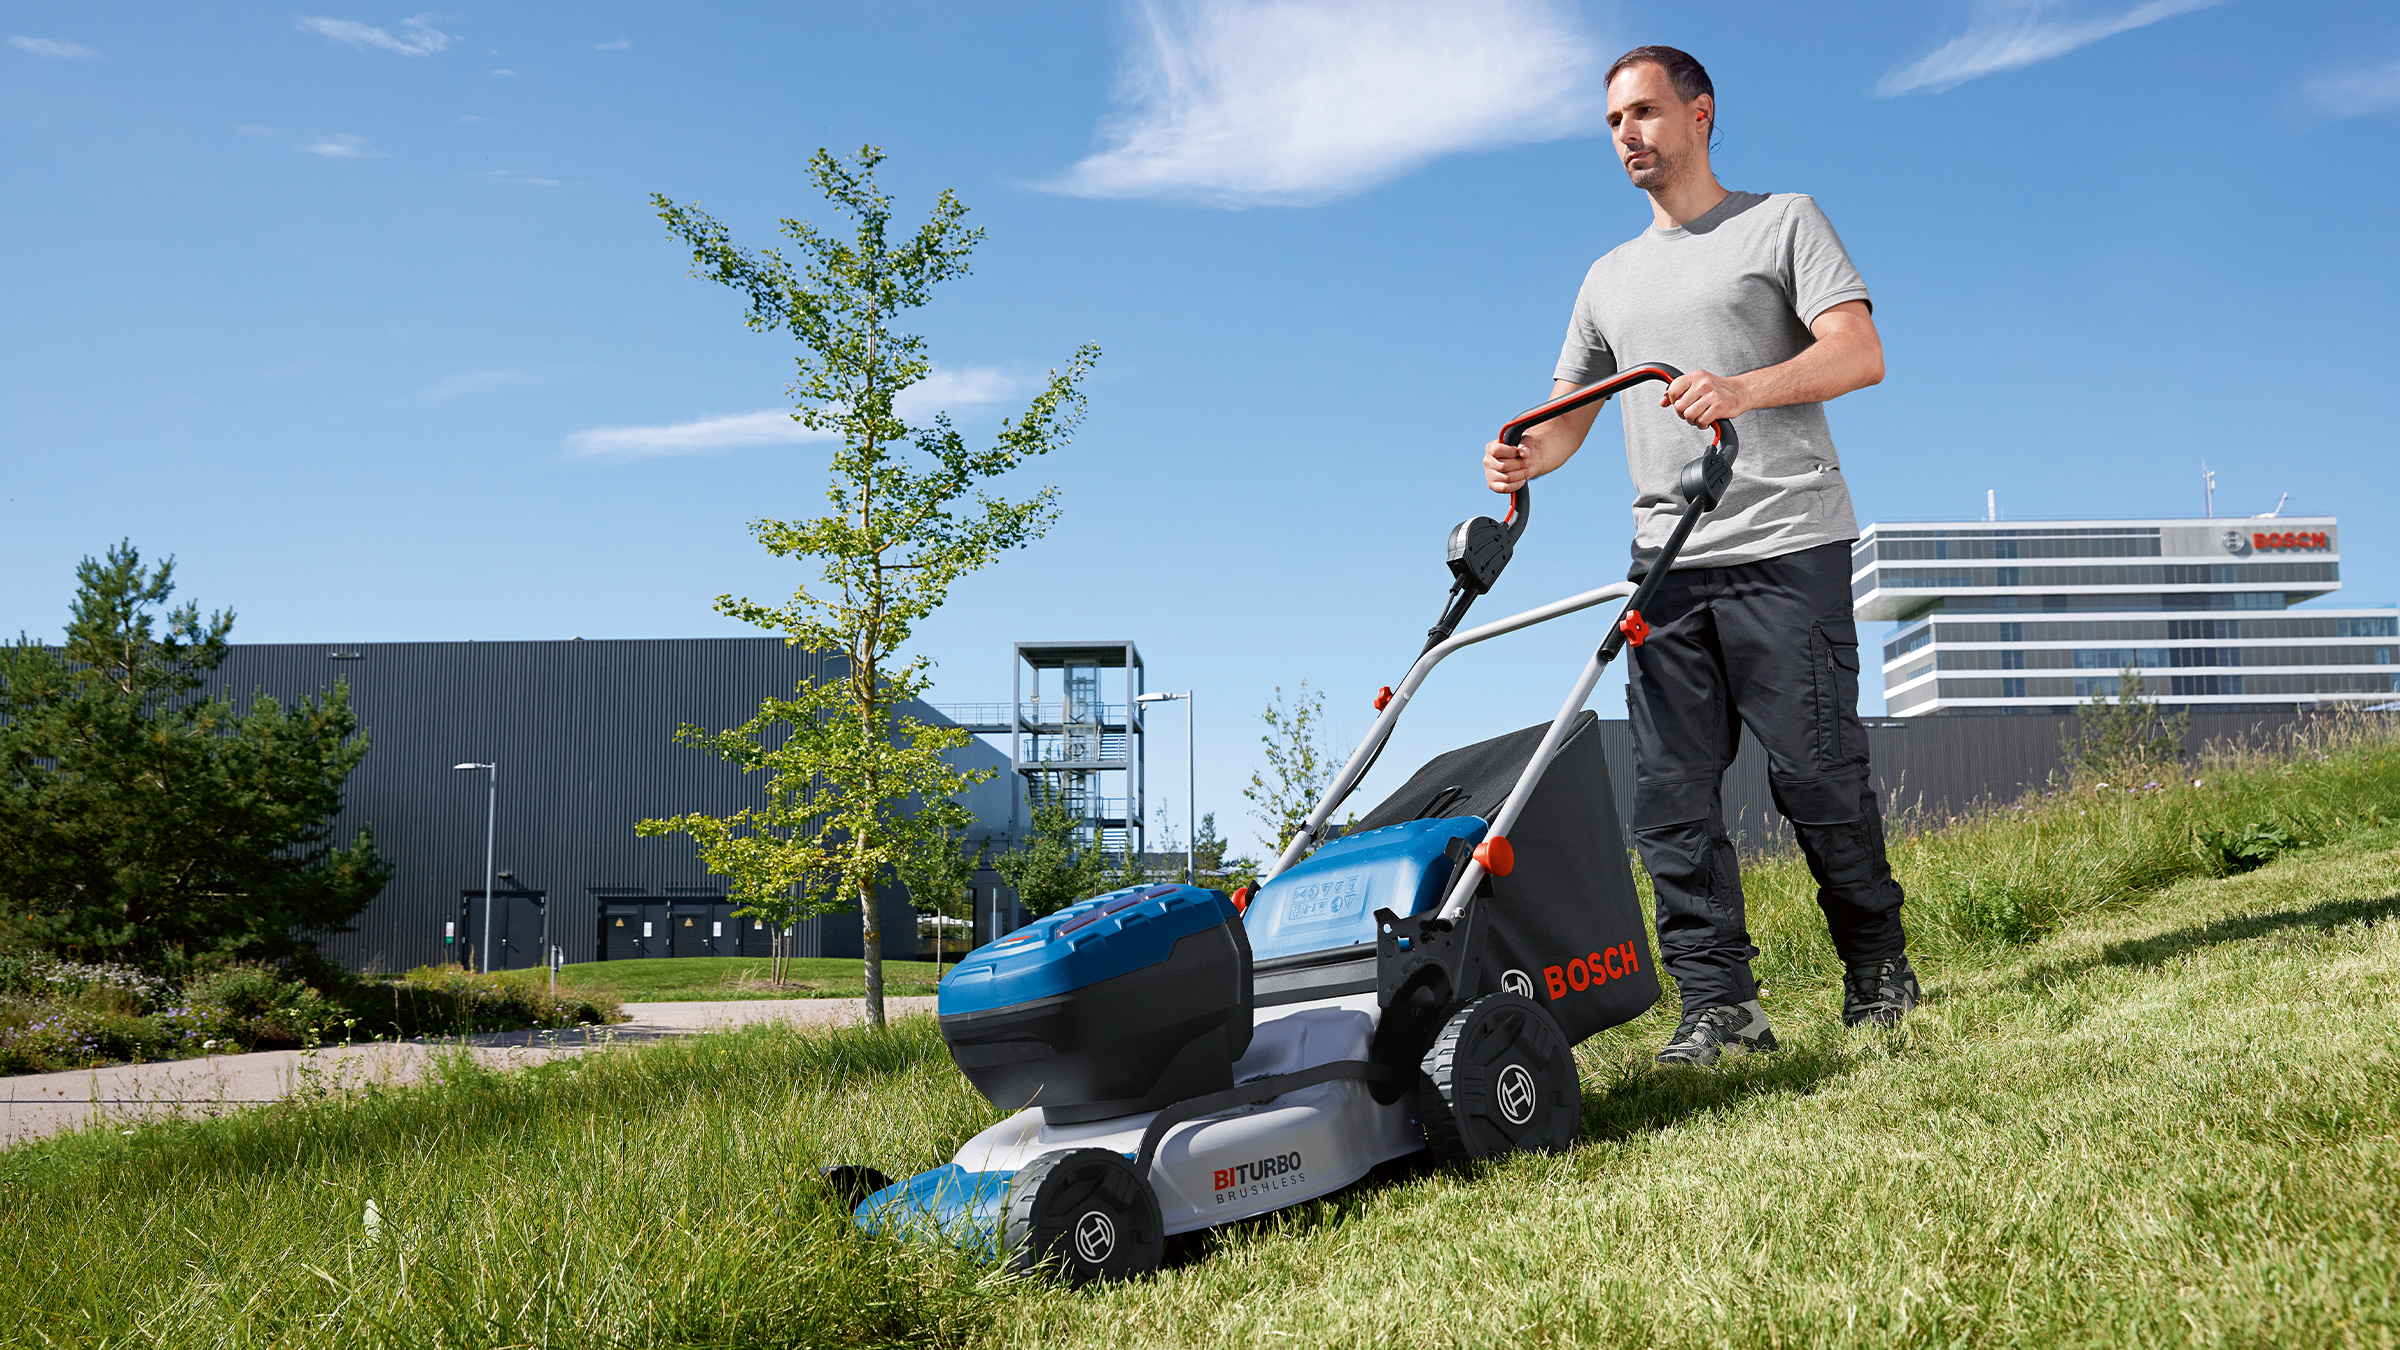 For mowing lawns of up to 1,000 m2: Powerful Bosch Professional cordless lawnmower